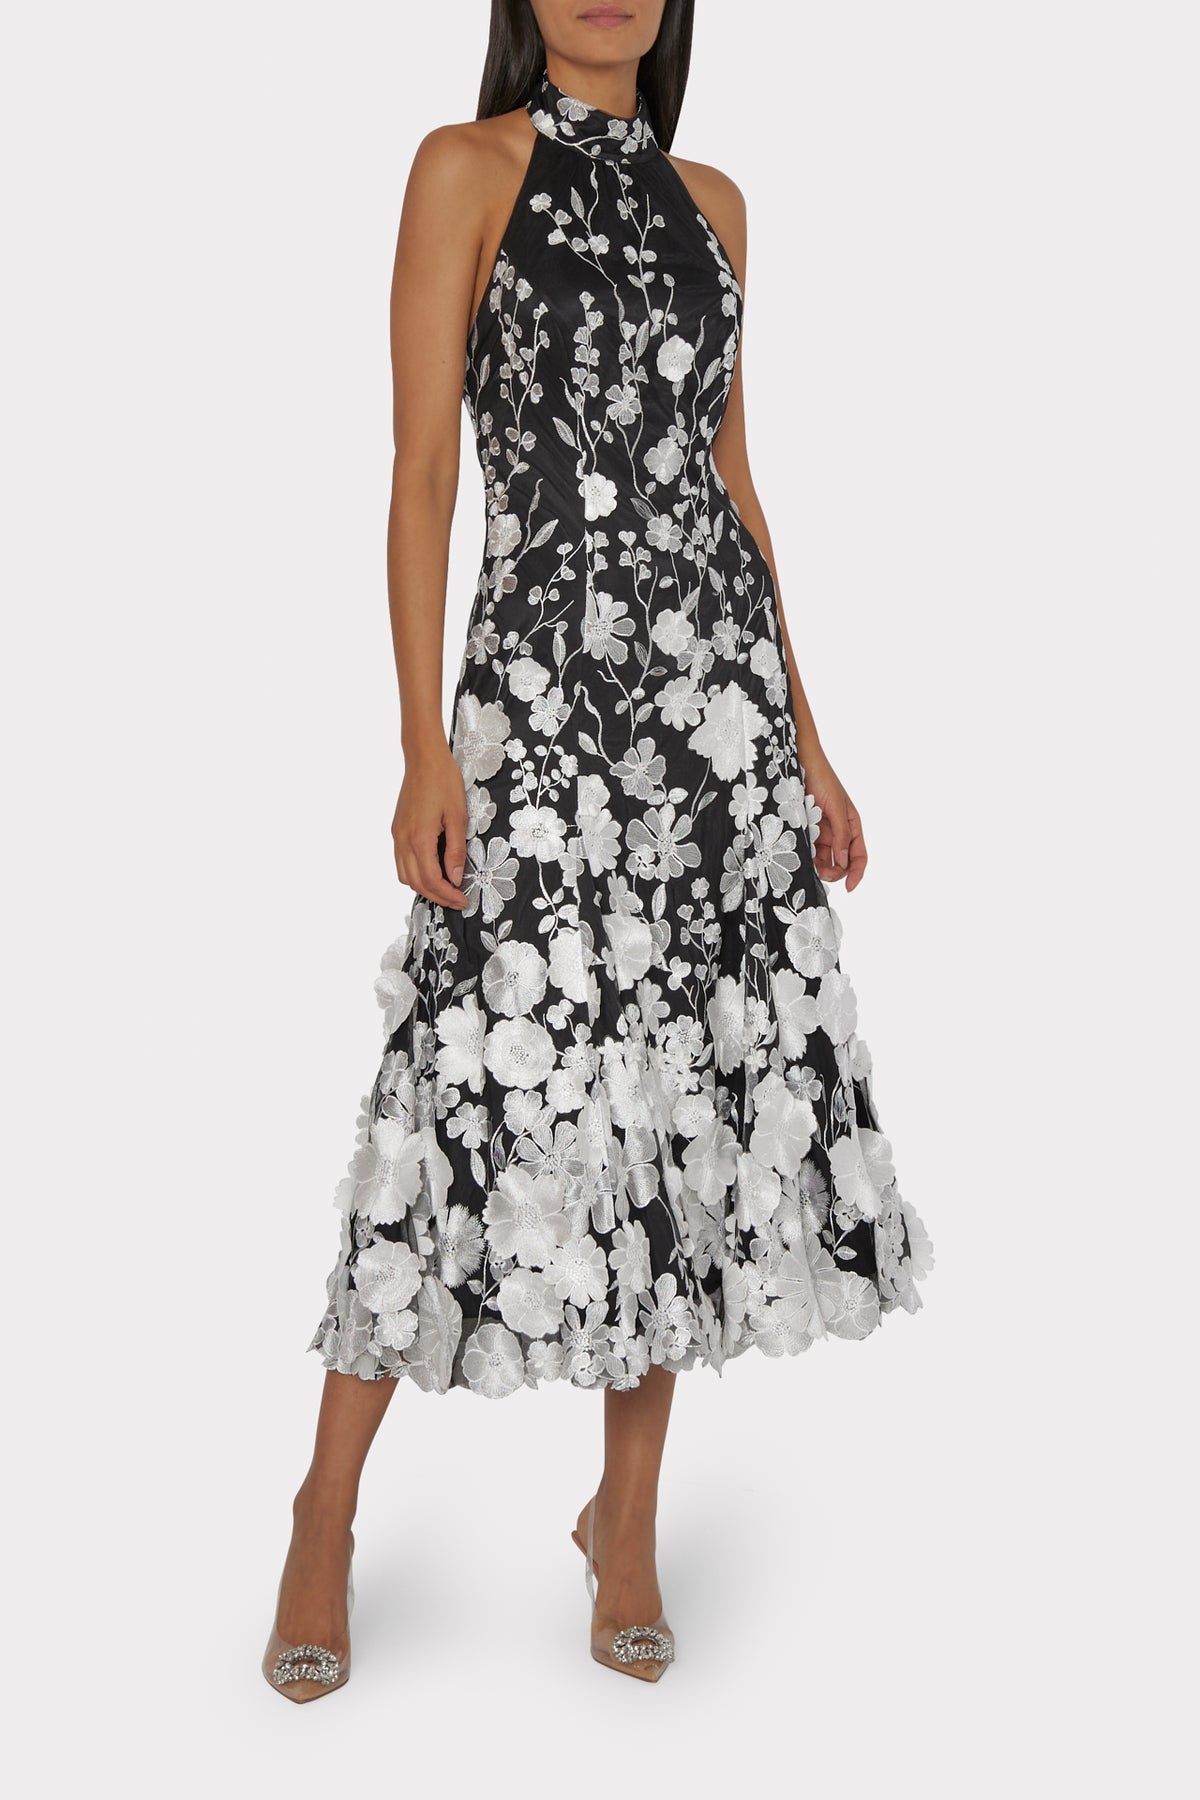 Milly Embroidered Black and White Floral Dress – MOTHER OF